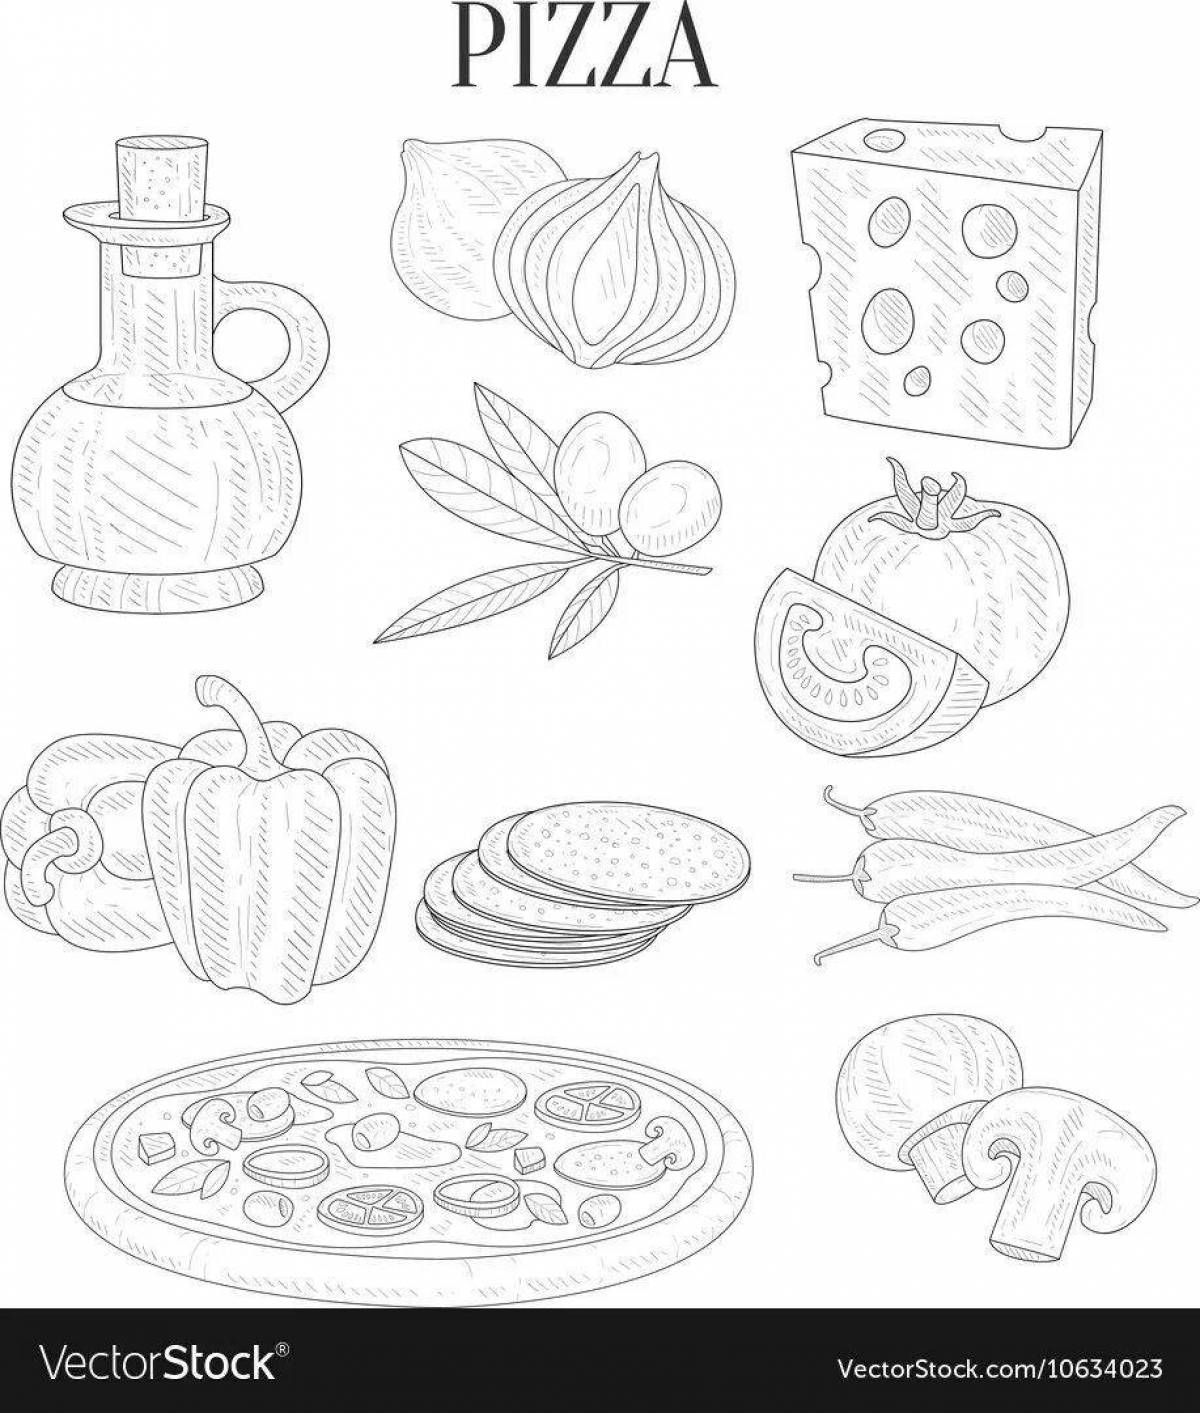 Colouring ingredients for an irresistible pizza